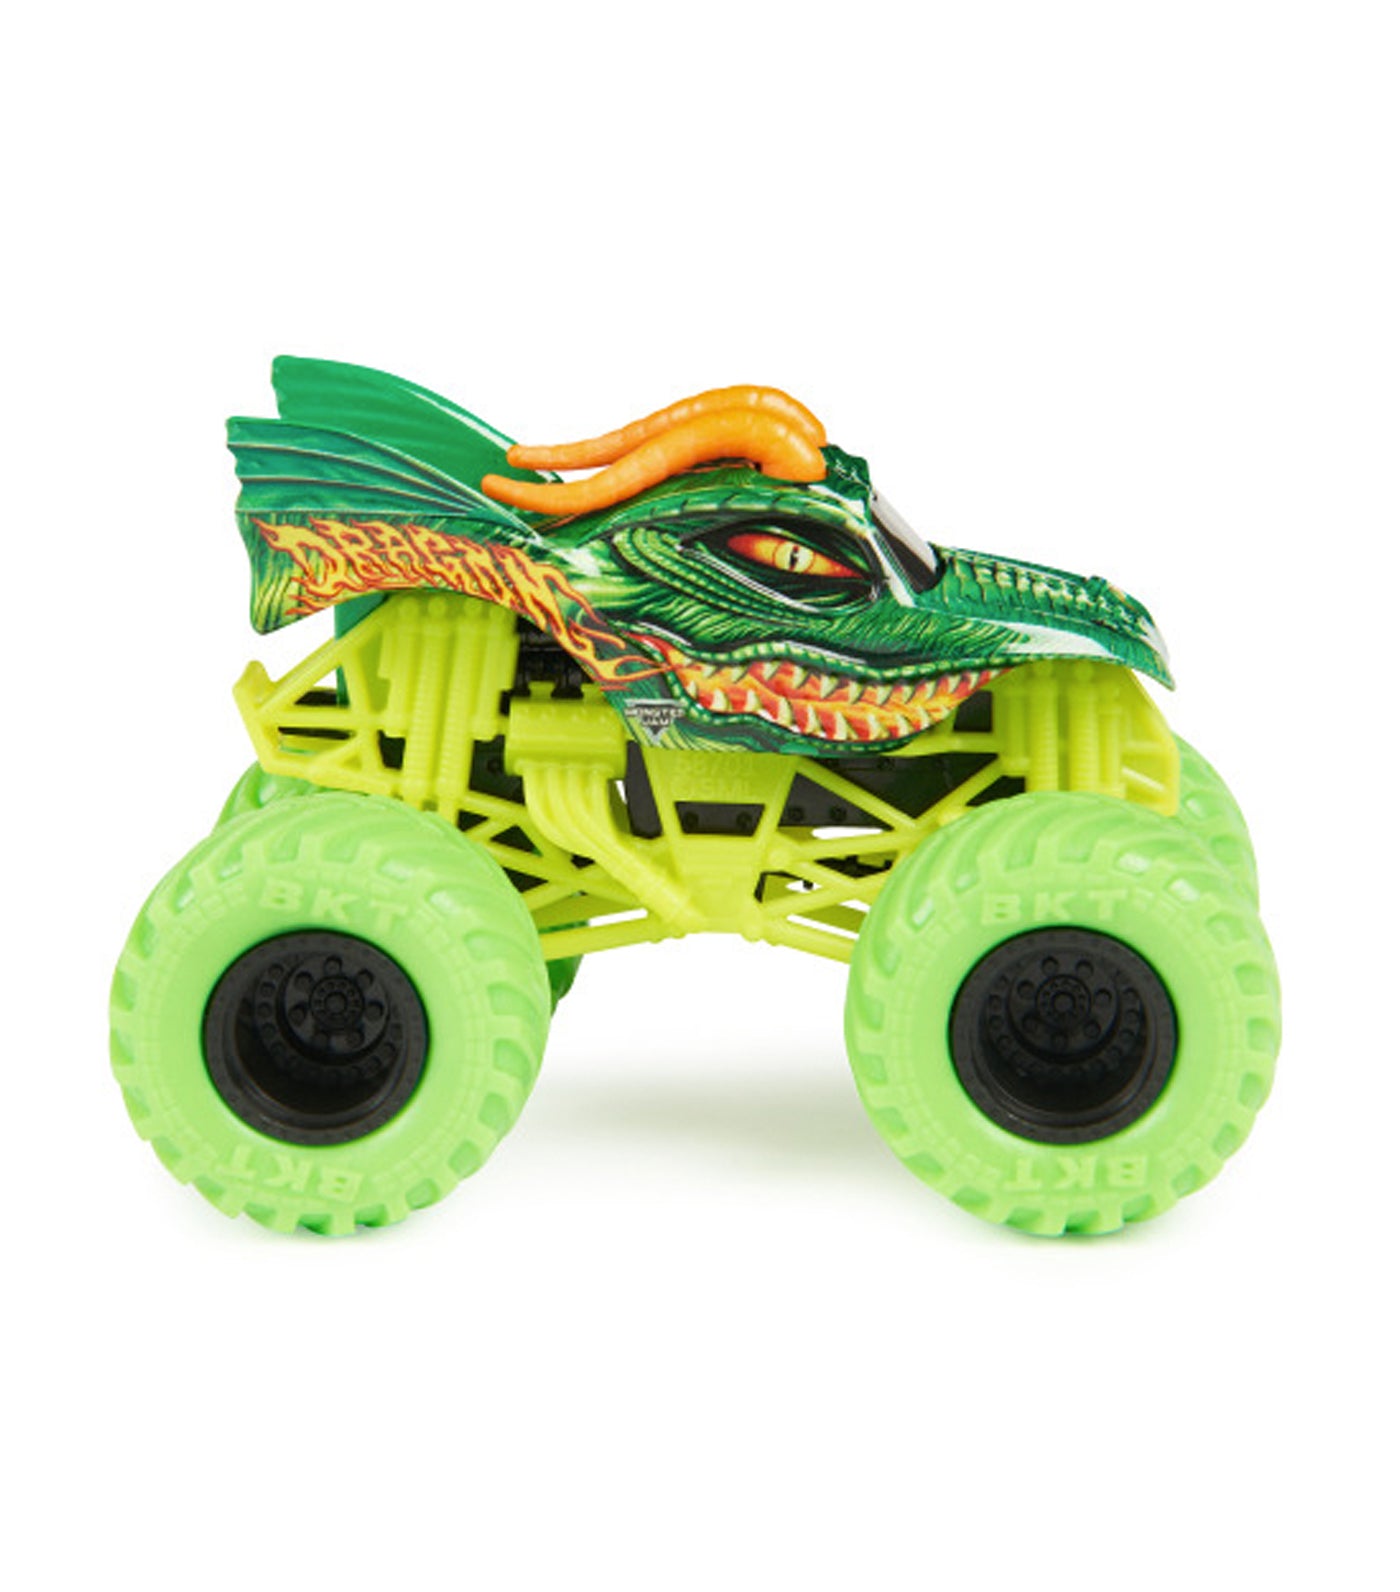 Diecast Dirty-to-Clean Monster Truck Set - Dragon VS Full Charge Neon